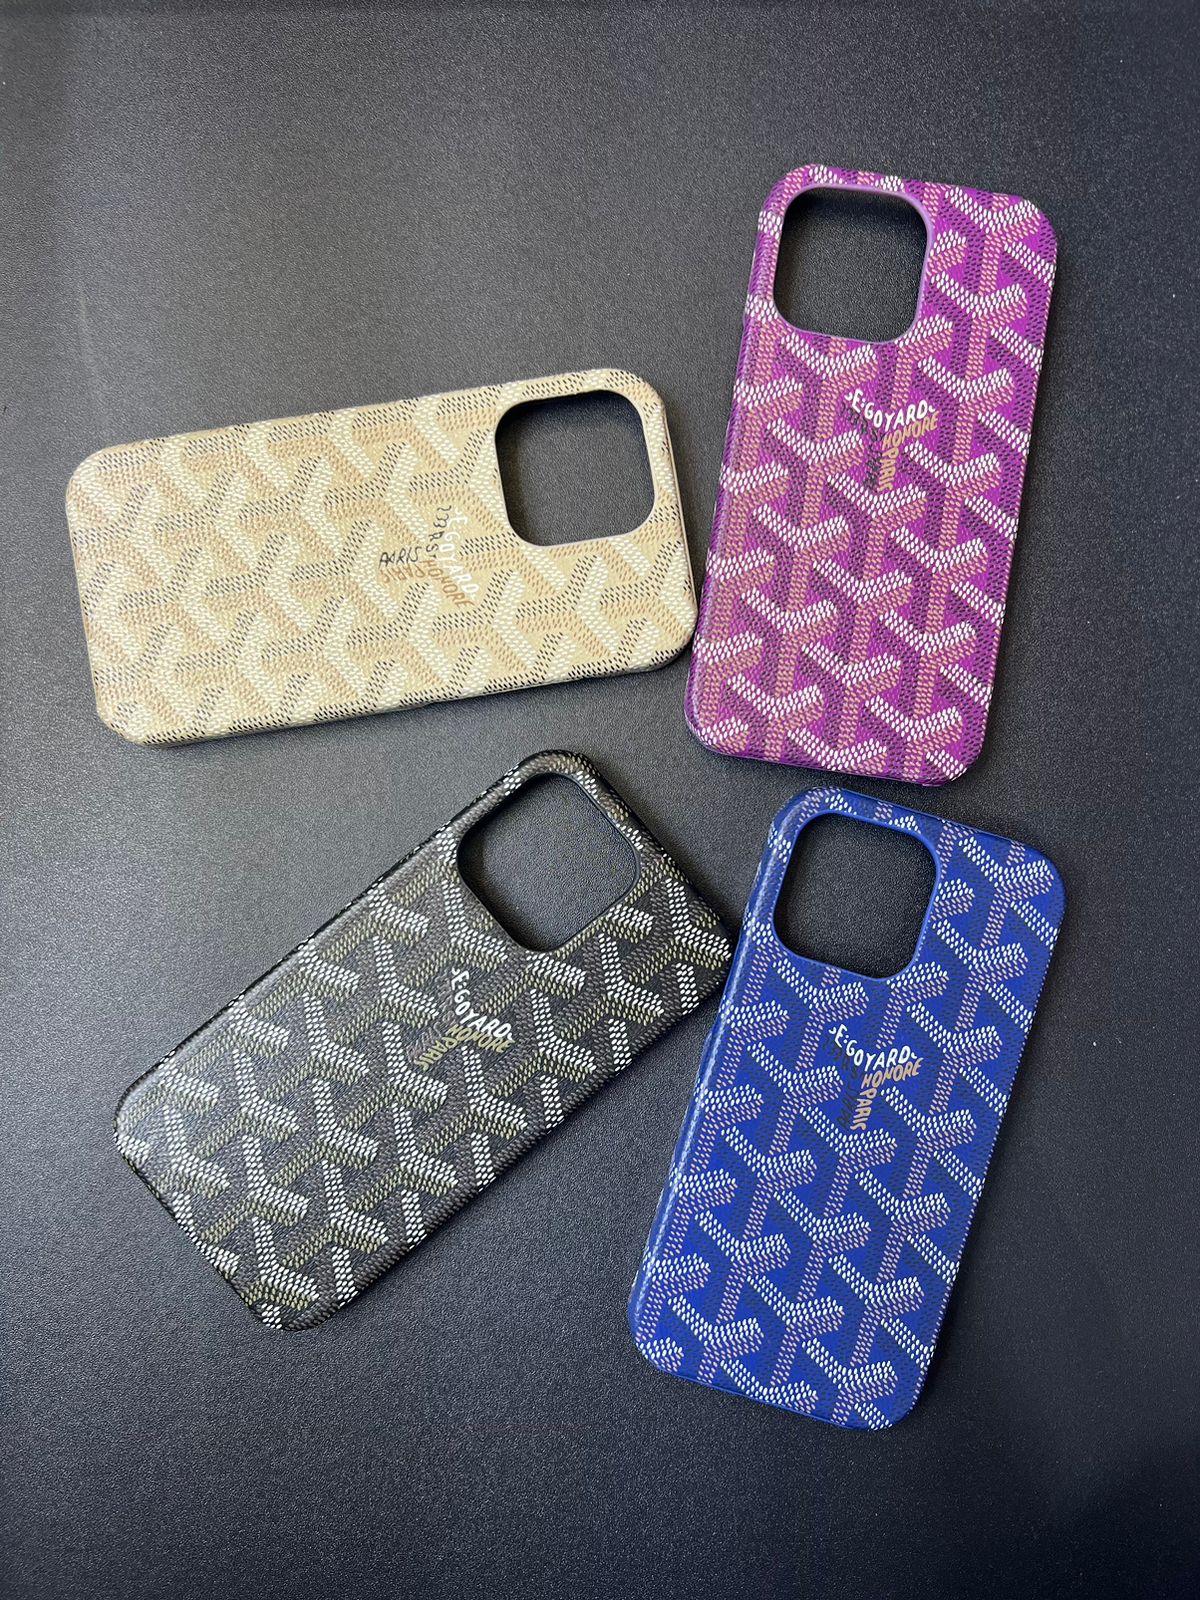 IPhoneGoyard Case, Mobile Phones Gadgets, Mobile Gadget Accessories, Cases Covers On Carousell